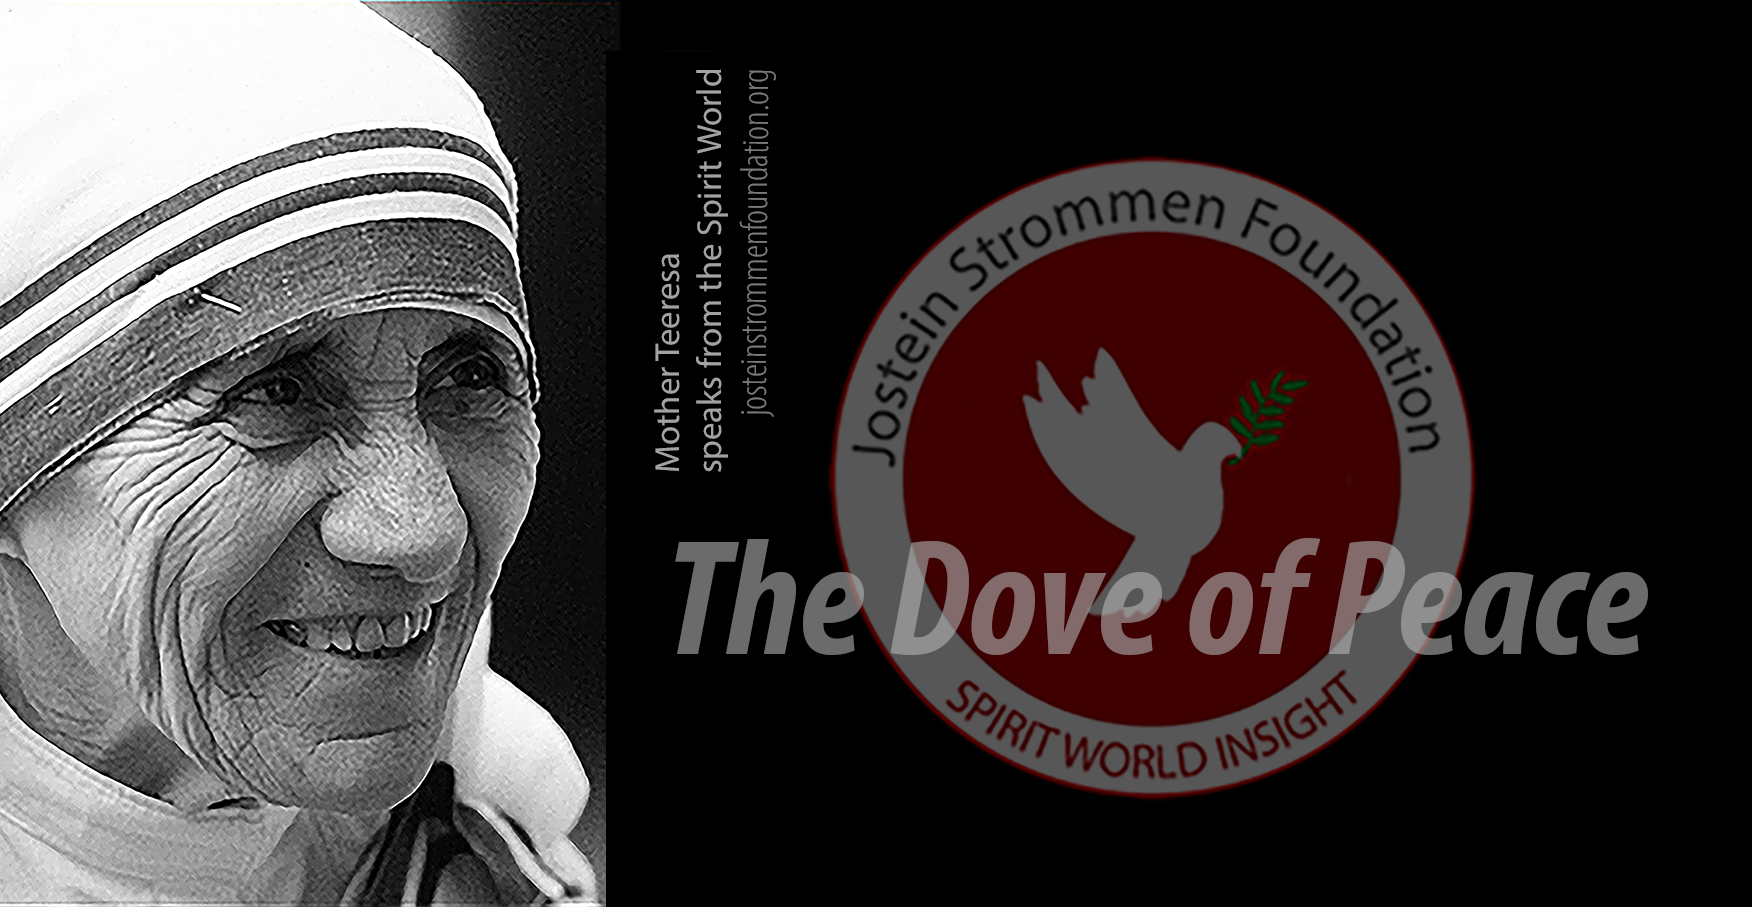 Mother Teresa - The Dove of Peace